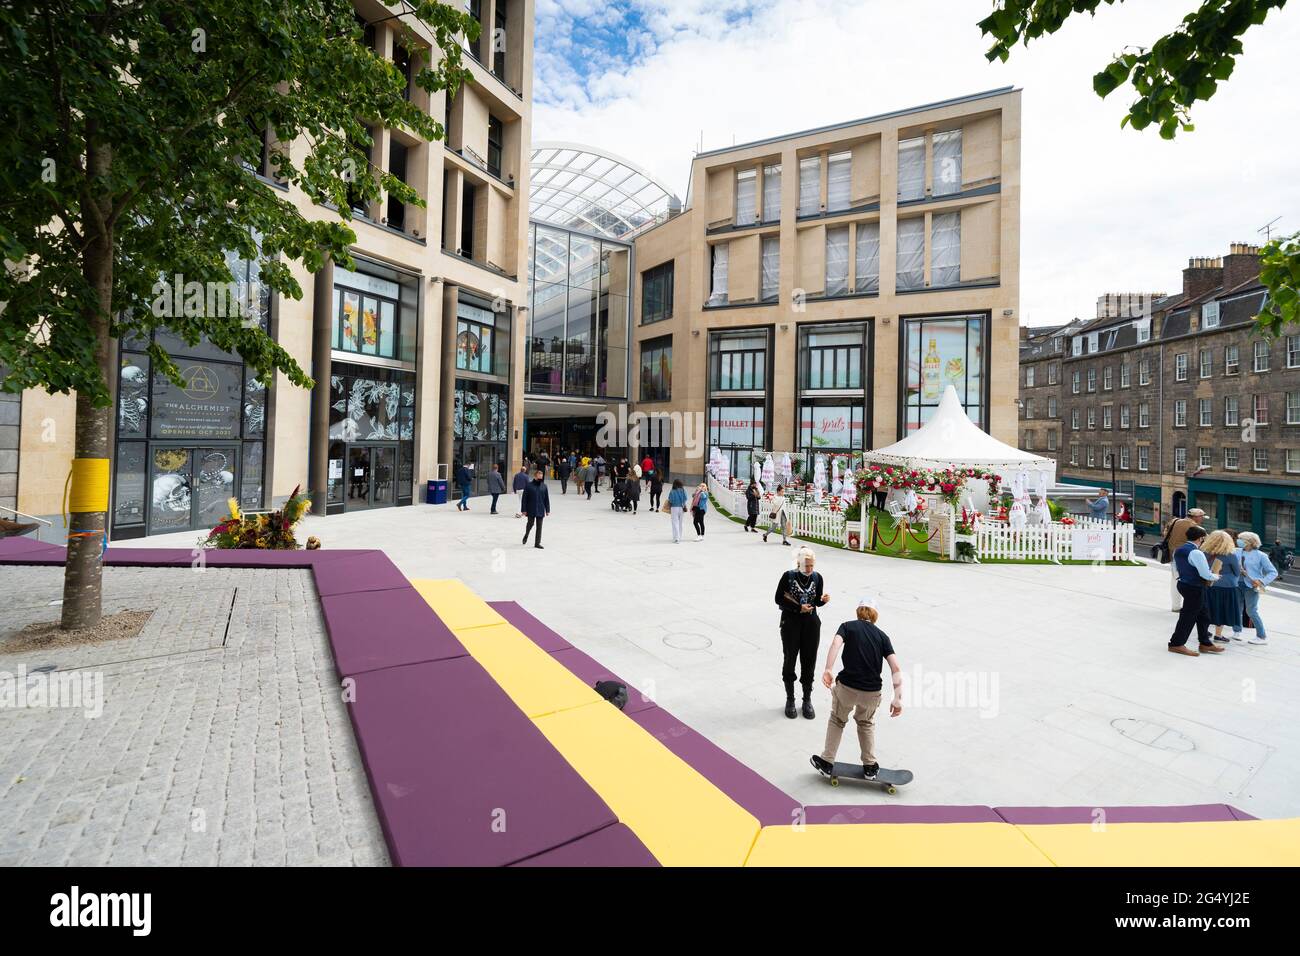 Edinburgh, Scotland, UK. 24 June 2021. First images of the new St James Quarter which opened this morning in Edinburgh. The large retail and residential complex replaced the St James Centre which occupied the site for many years. Pic; Exterior of entrance to mall onto Leith Street. Iain Masterton/Alamy Live News Stock Photo